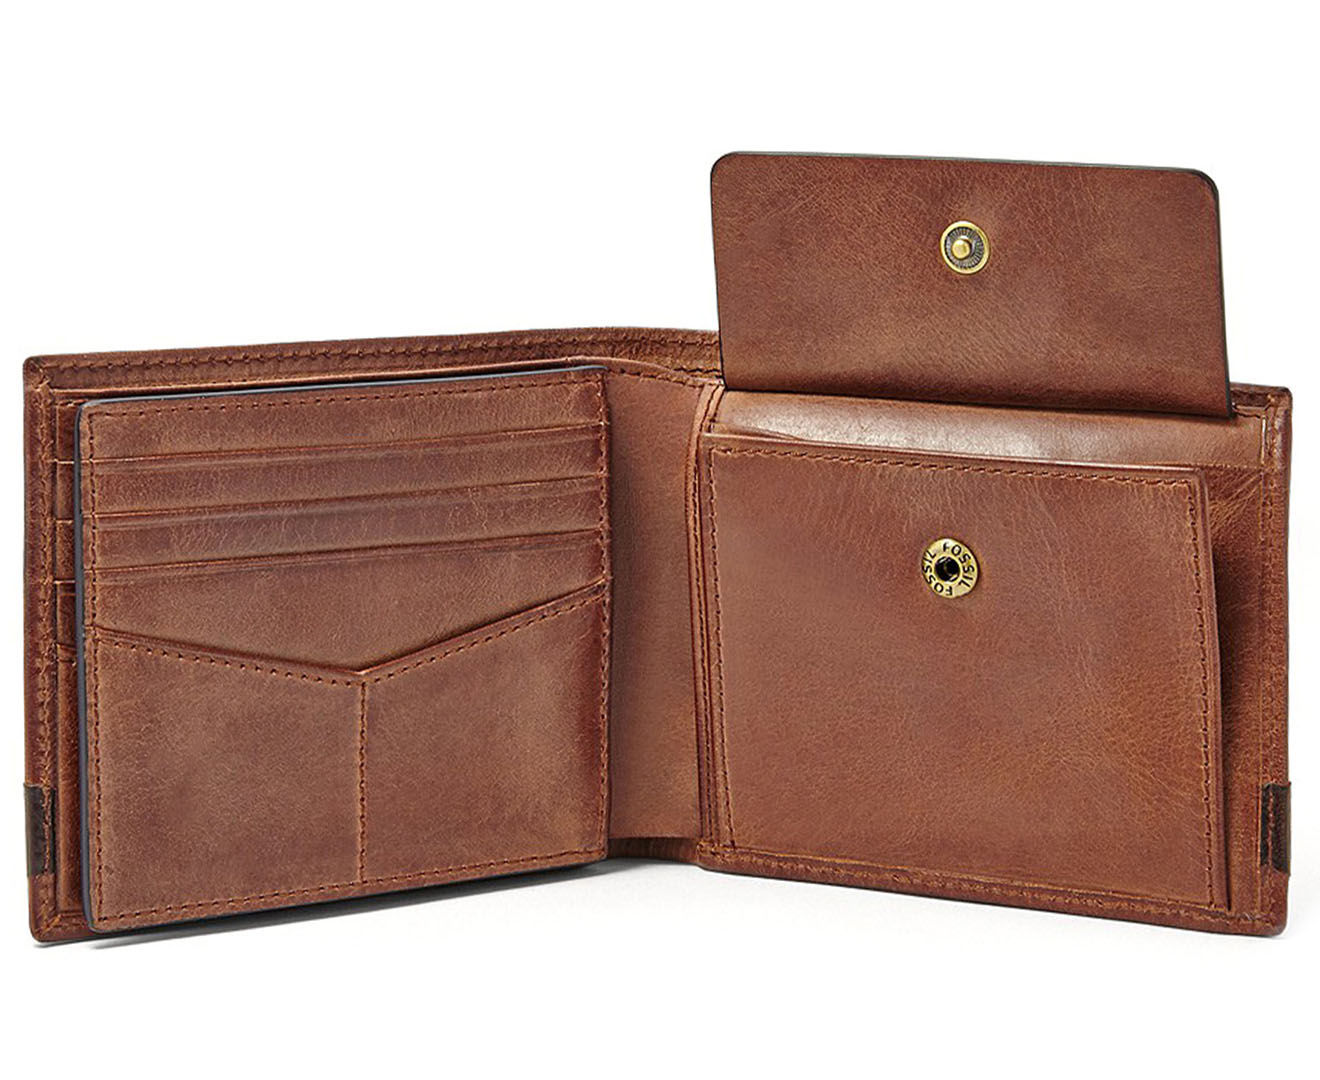 Fossil Quinn Large Coin Pocket Bifold Wallet - Brown | Catch.com.au